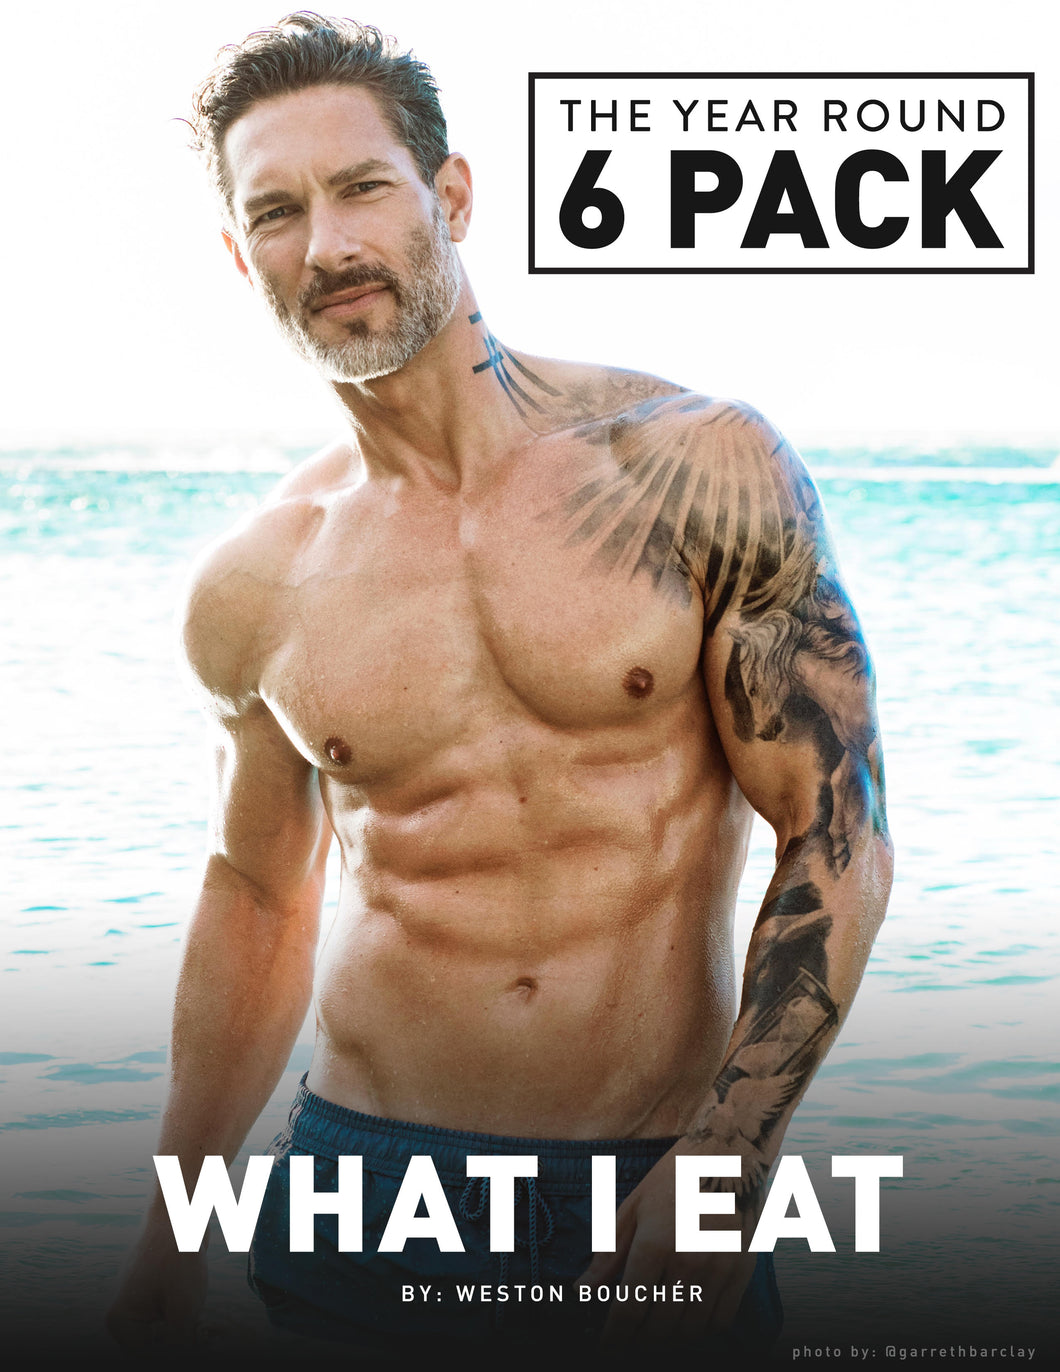 THE YEAR ROUND 6 PACK // What I Eat - FREE